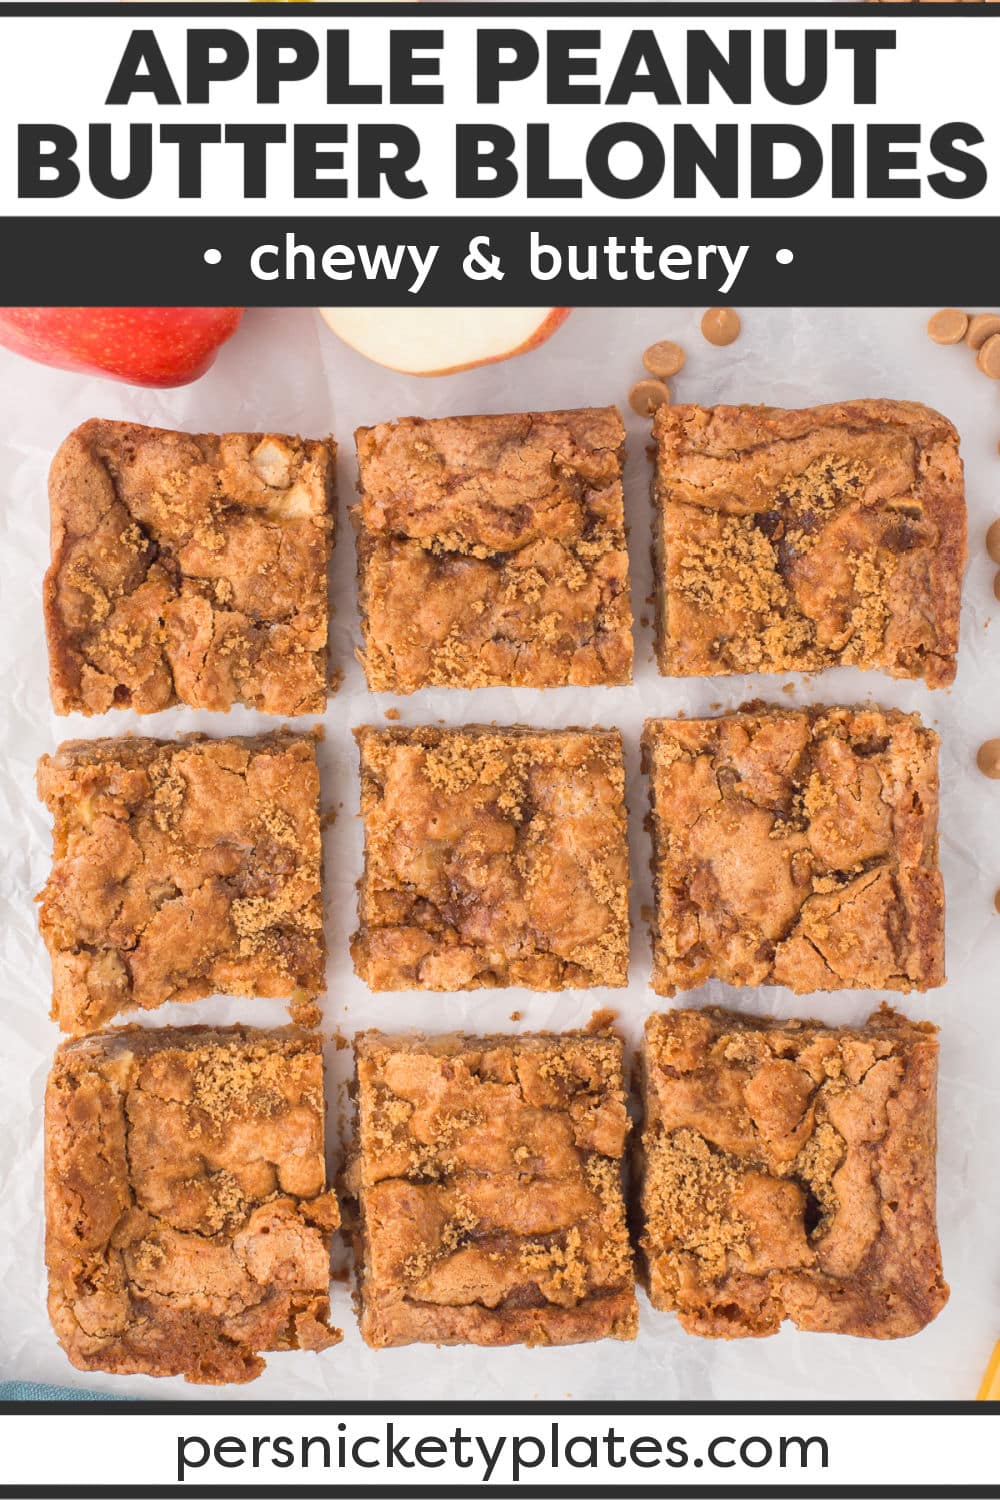 Easy apple blondies with peanut butter chips are a chewy, decadent dessert bar made with fresh apples, cinnamon, nutmeg, brown sugar, and little flecks of peanut butter chips! The entire batch is baked and ready to serve in under 1 hour making these the perfect treat to serve for any occasion! | www.persnicketyplates.com